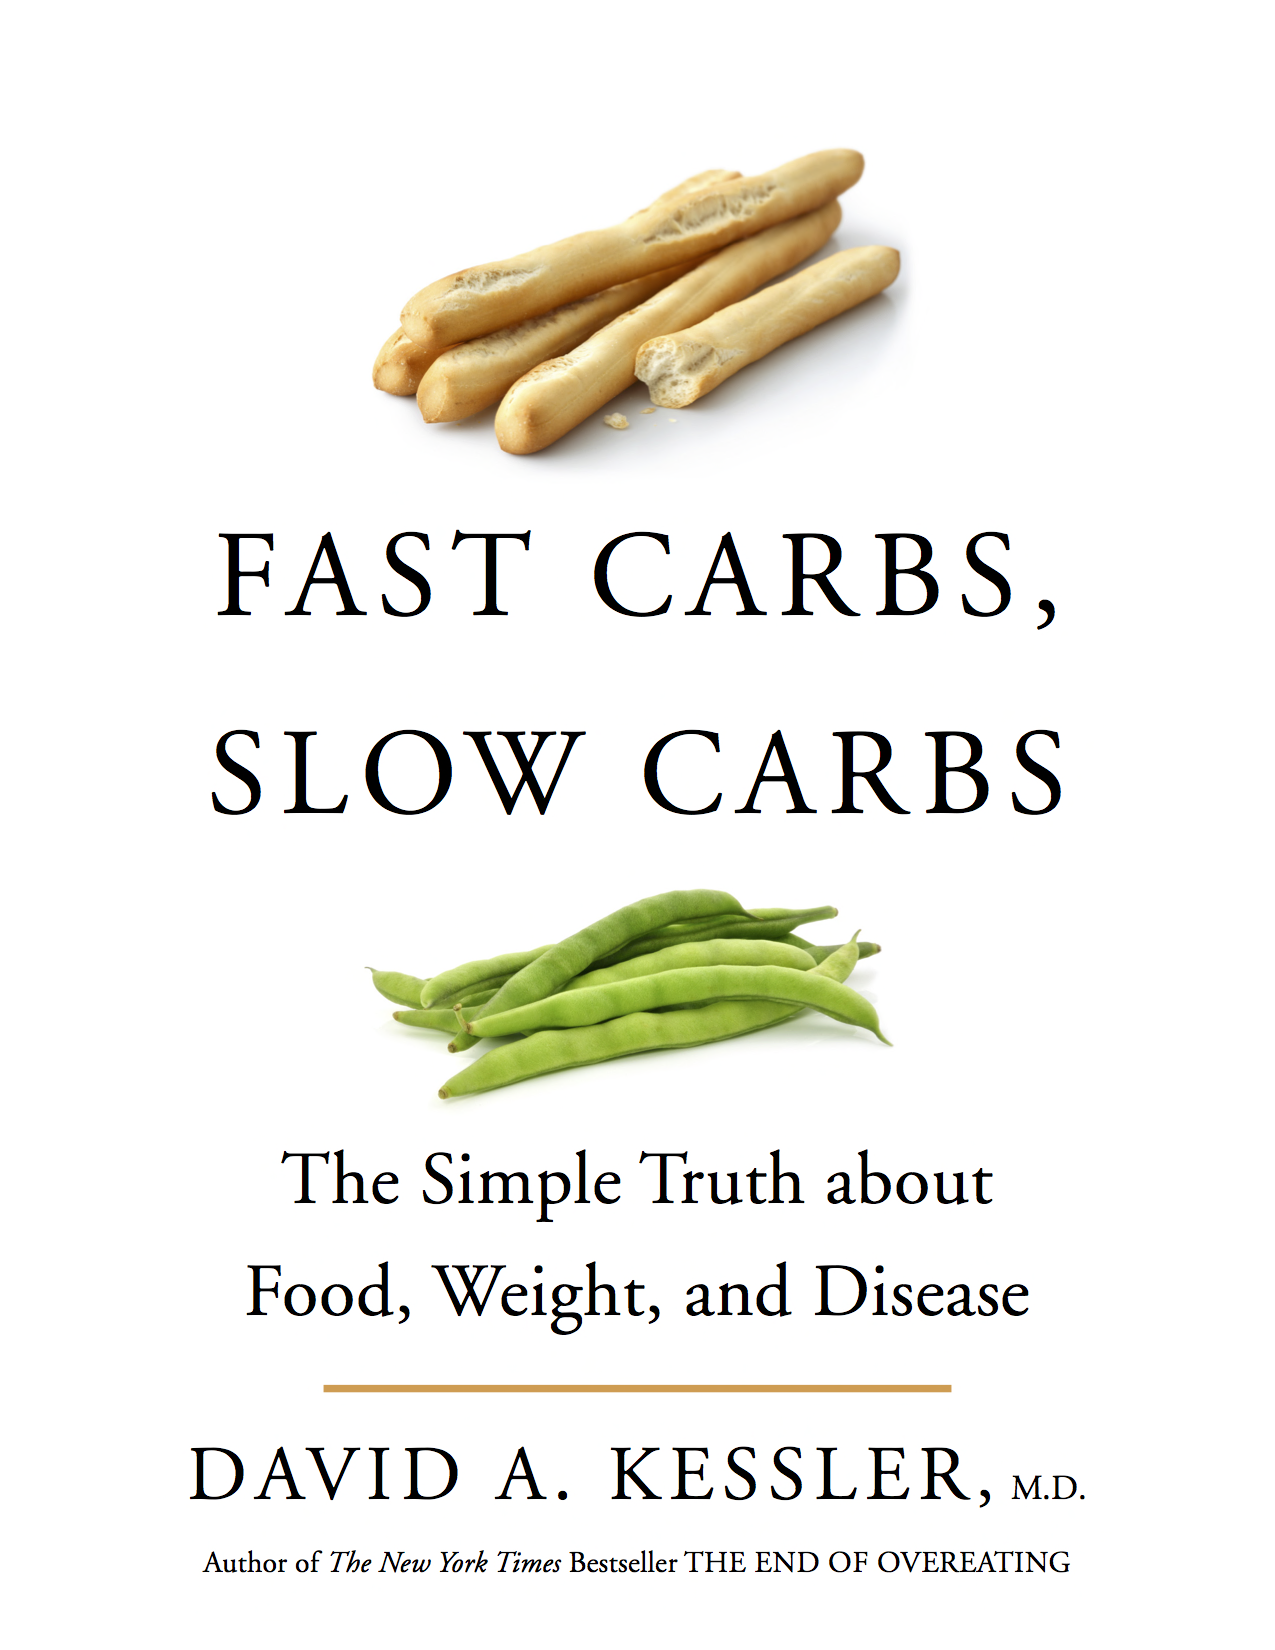 FAST CARBS, SLOW CARBS by David A. Kessler, MD